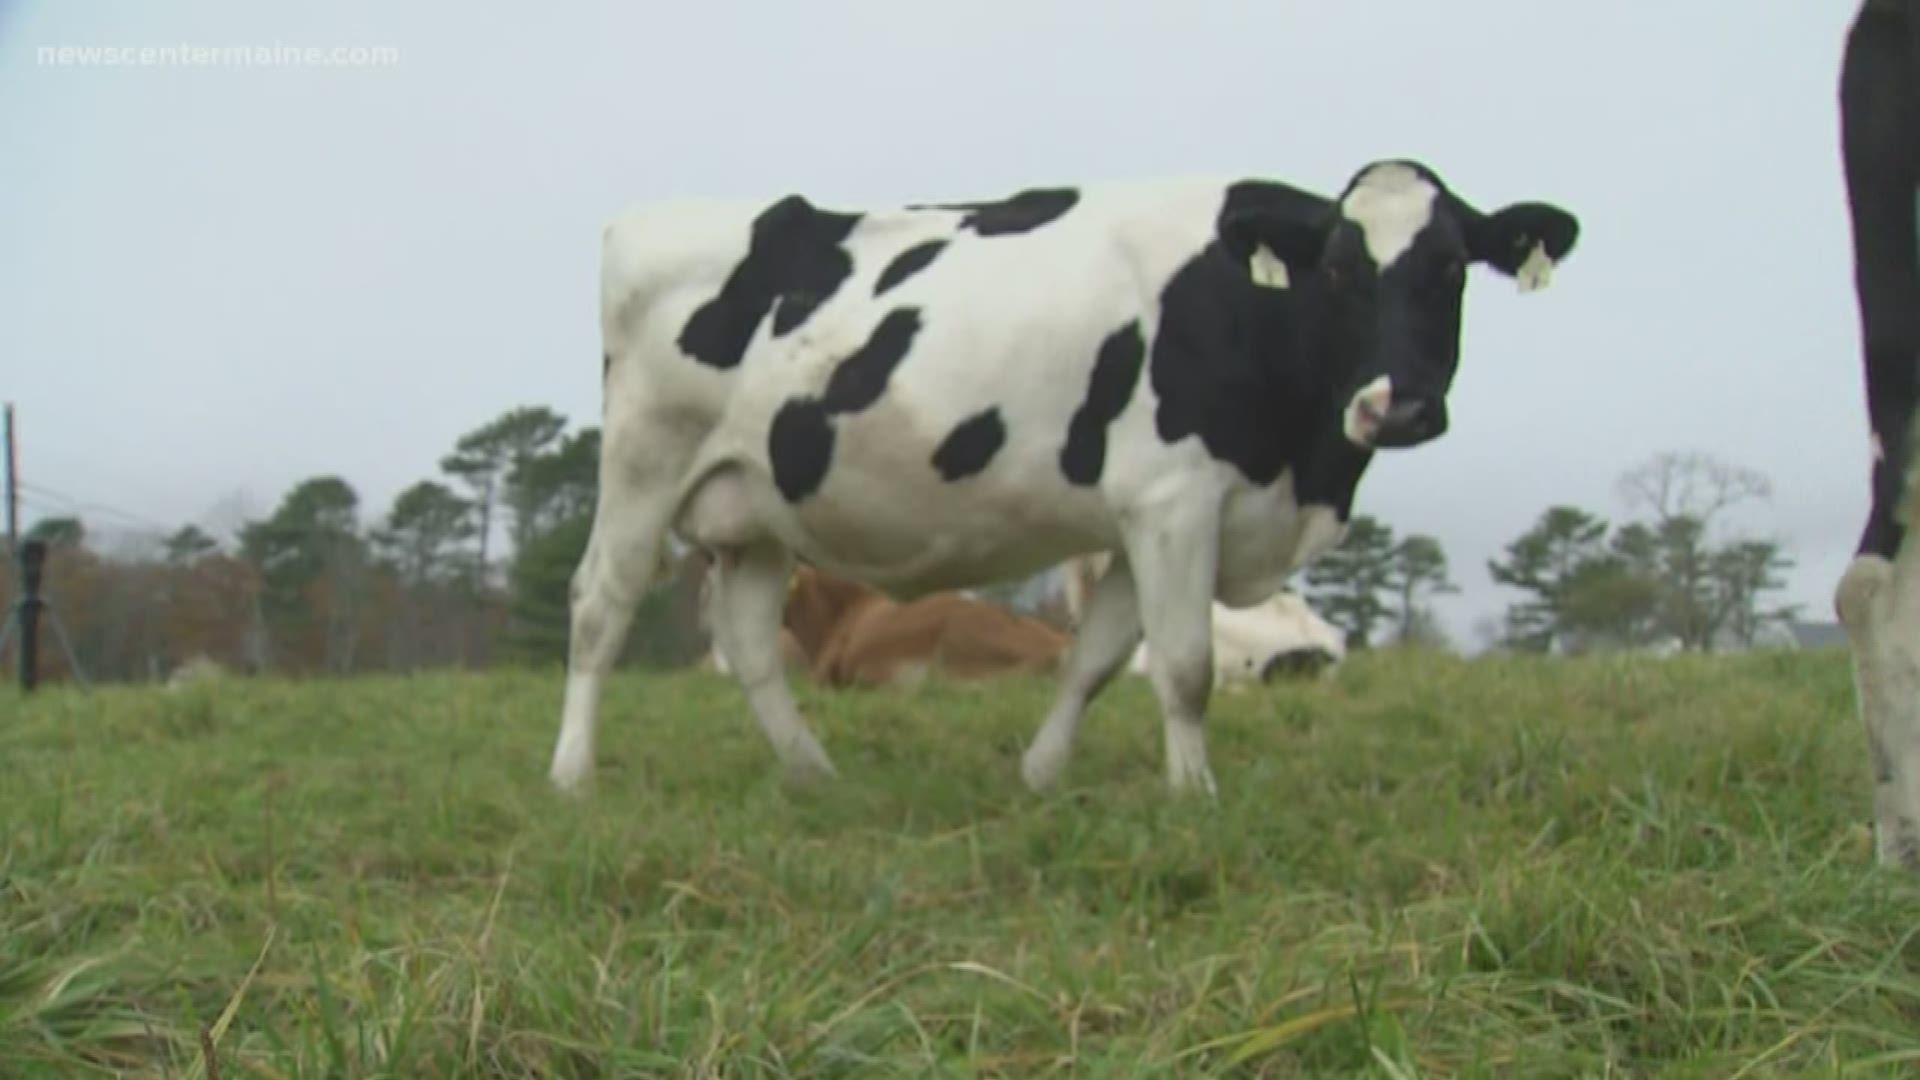 Research in Maine will measure the methane released by cows who have been fed a seaweed diet. They hope it will help climate change.